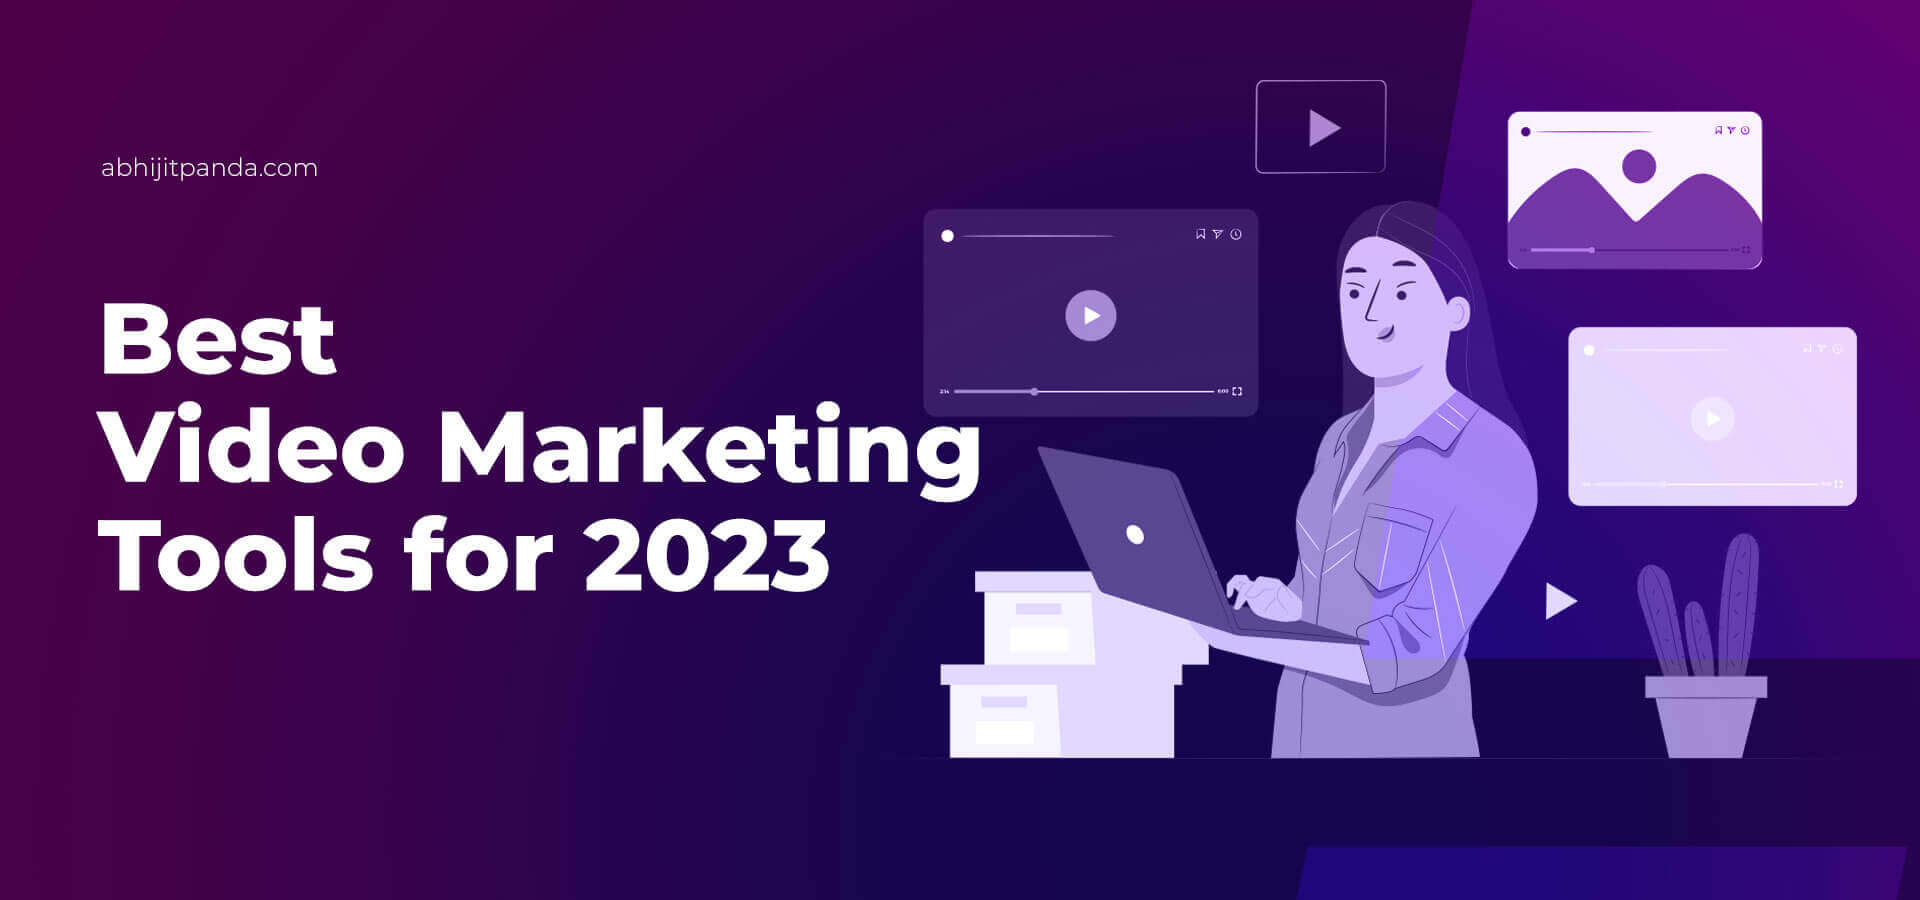 Best Video Marketing Tools for 2023